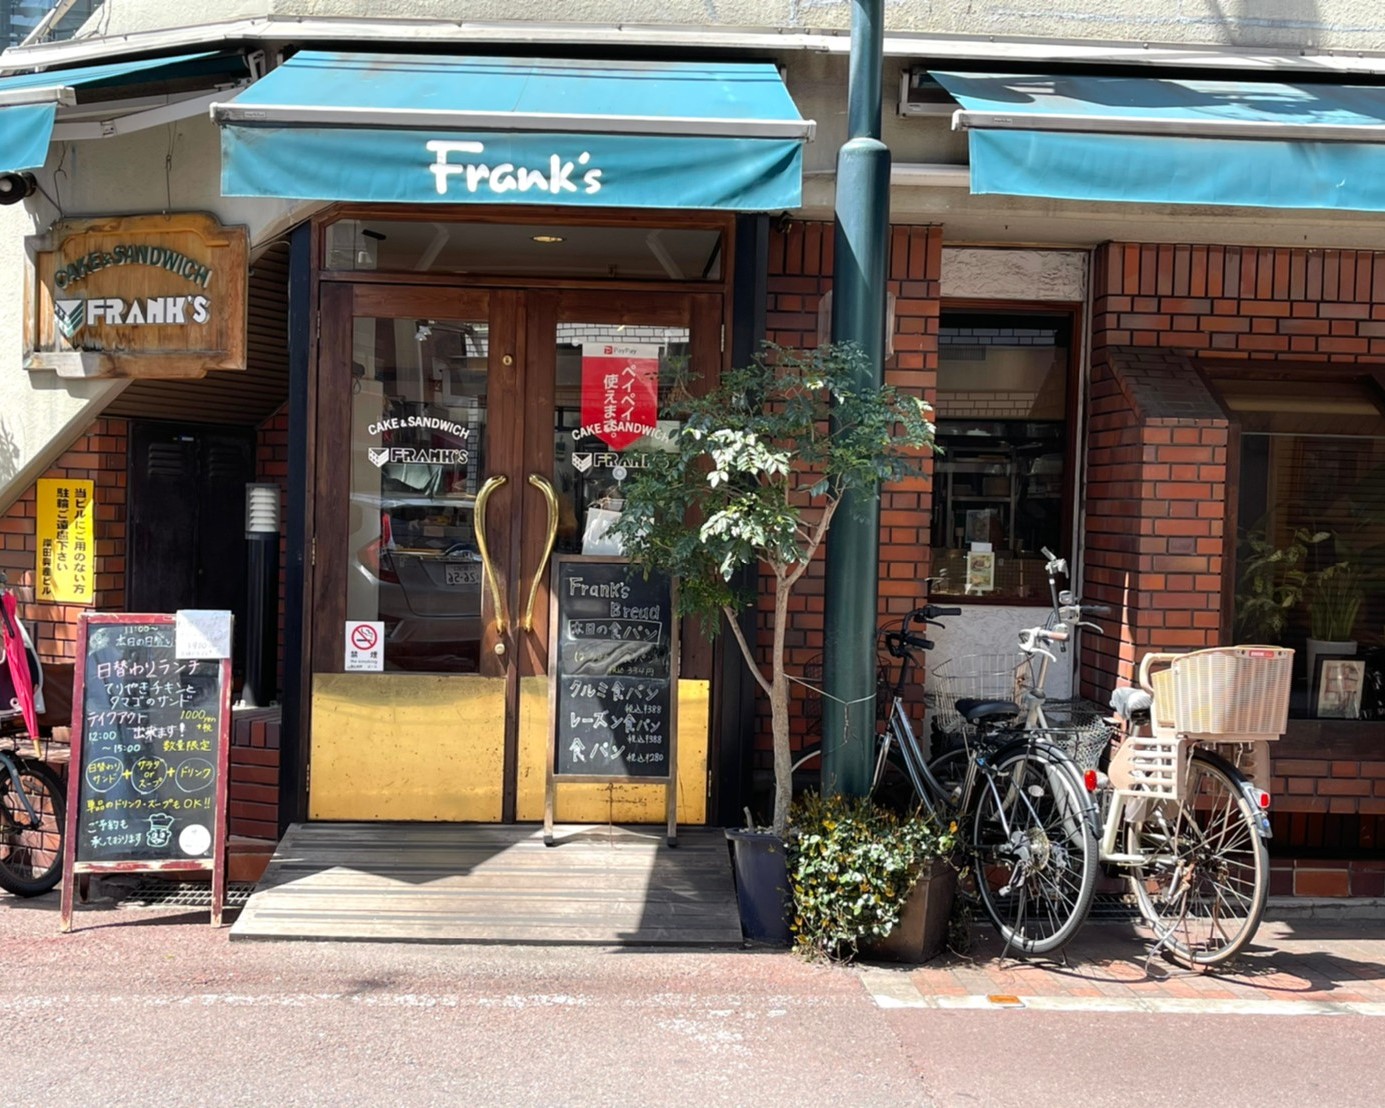 FRANK’S” is very popular for its handmade and carefully crafted sandwiches